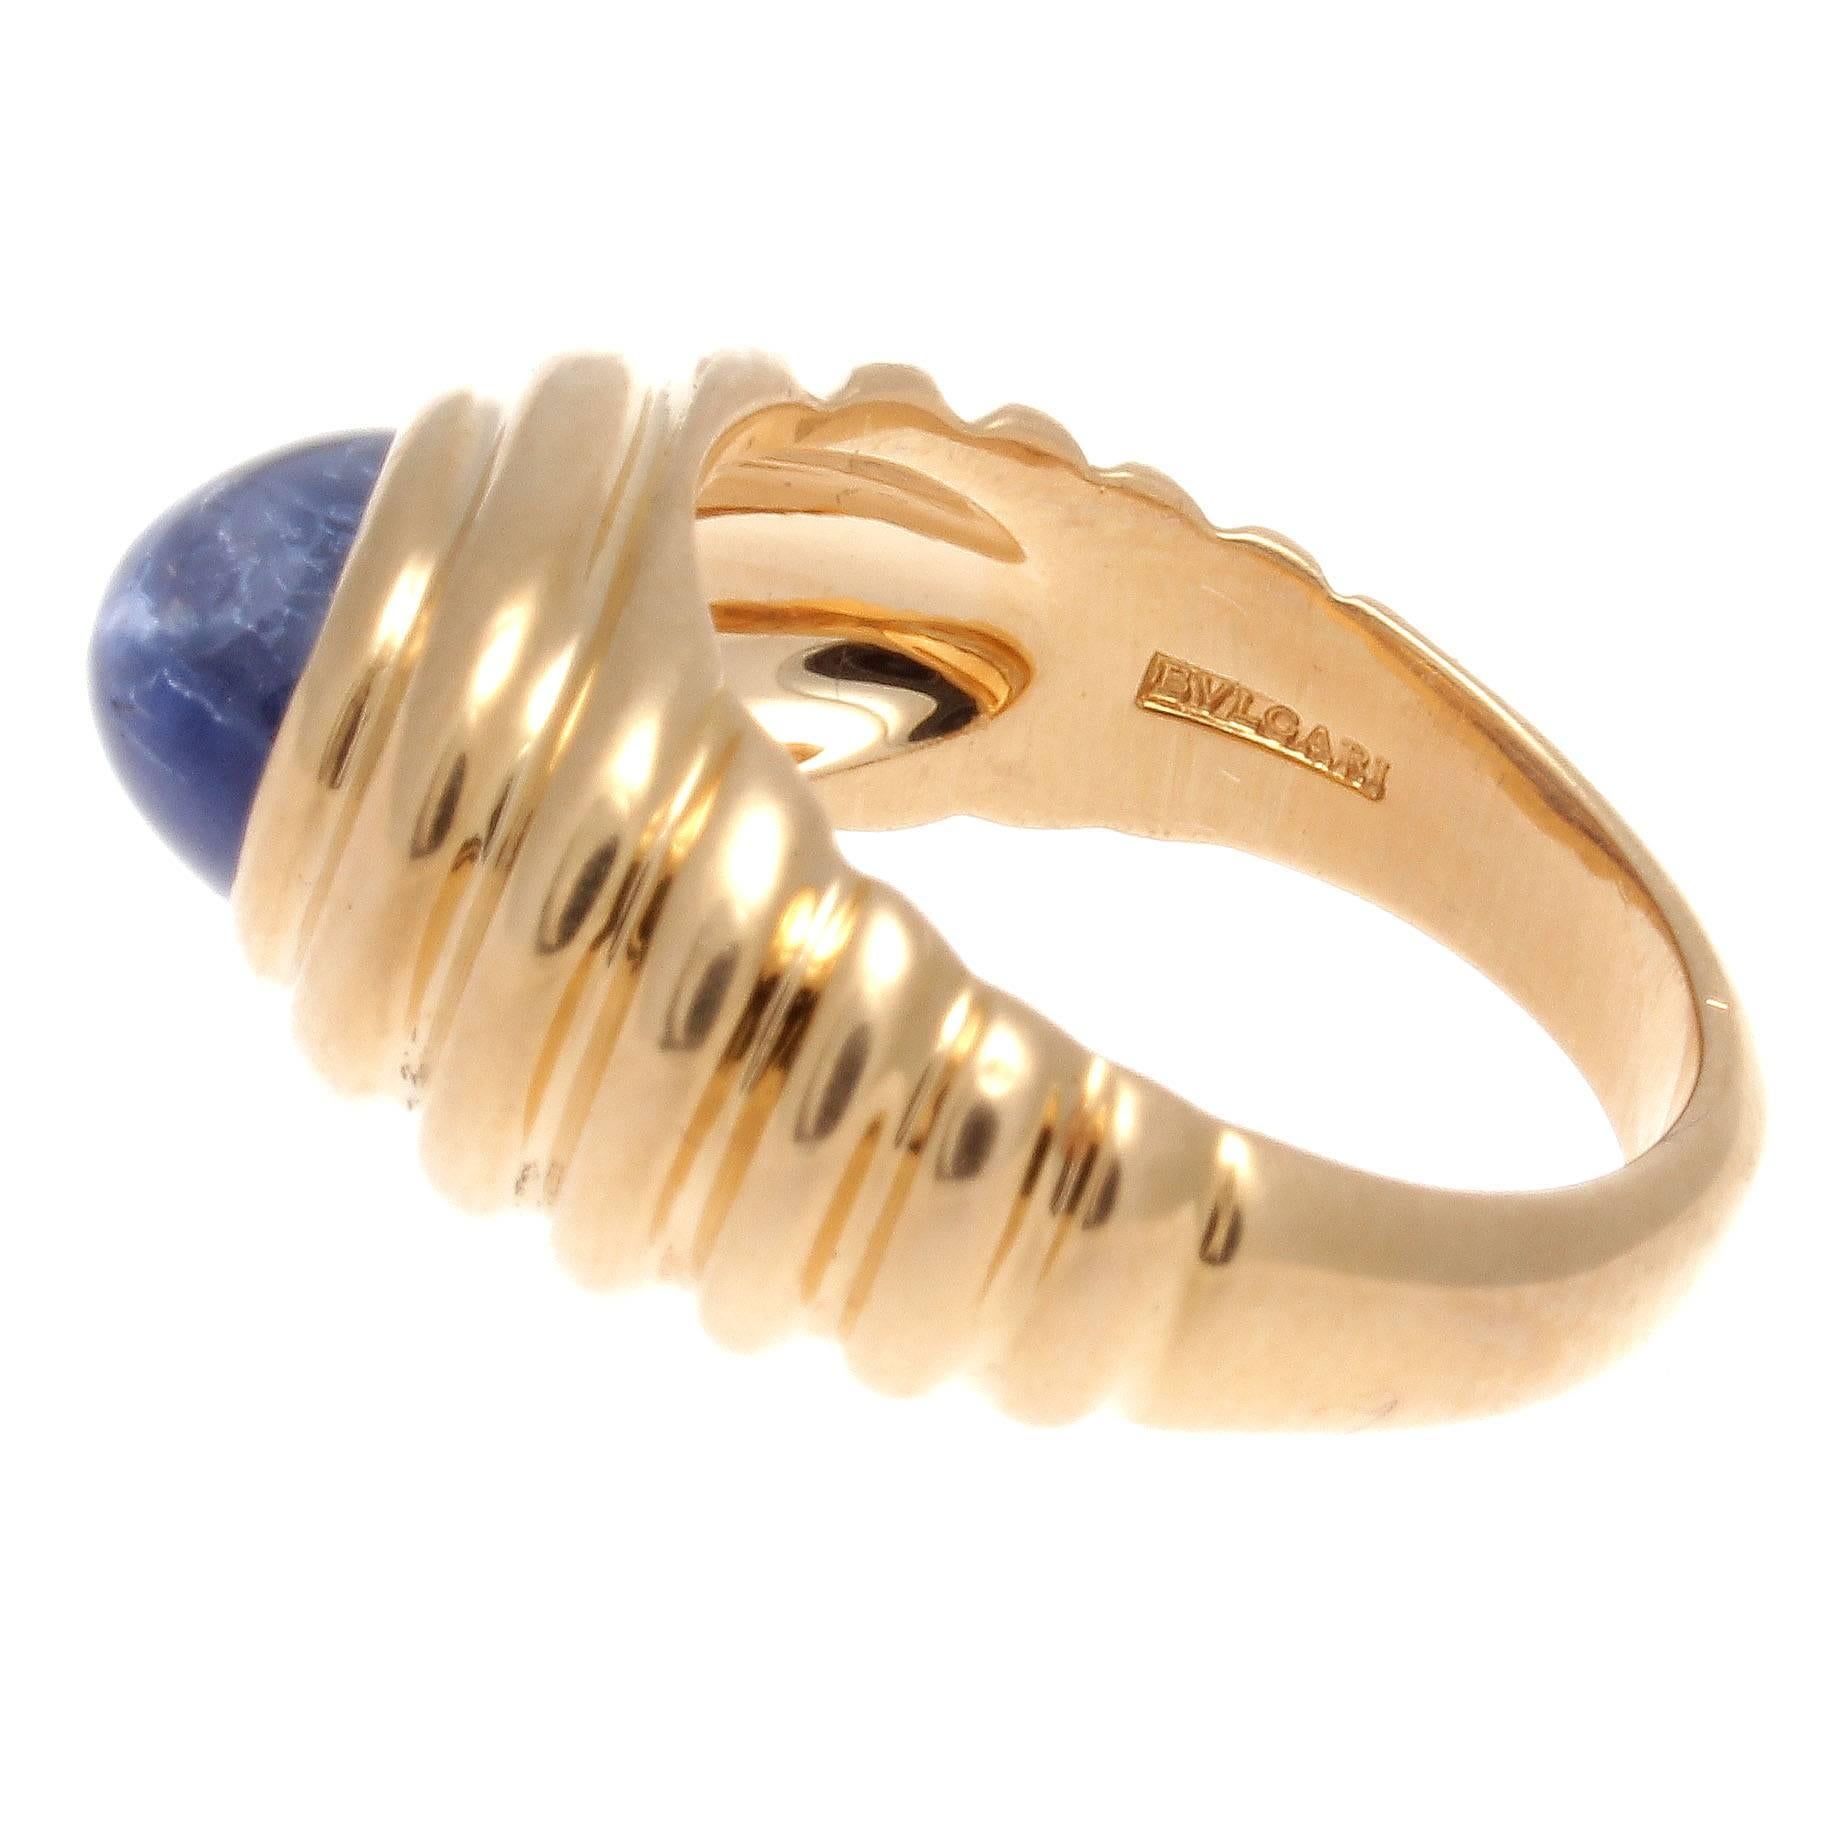 An alluring creation of color and design from Bulgari. Featuring a translucently vibrant blue cabochon cut sapphire uplifted by ascending contours of 18k yellow gold. Signed Bulgari.